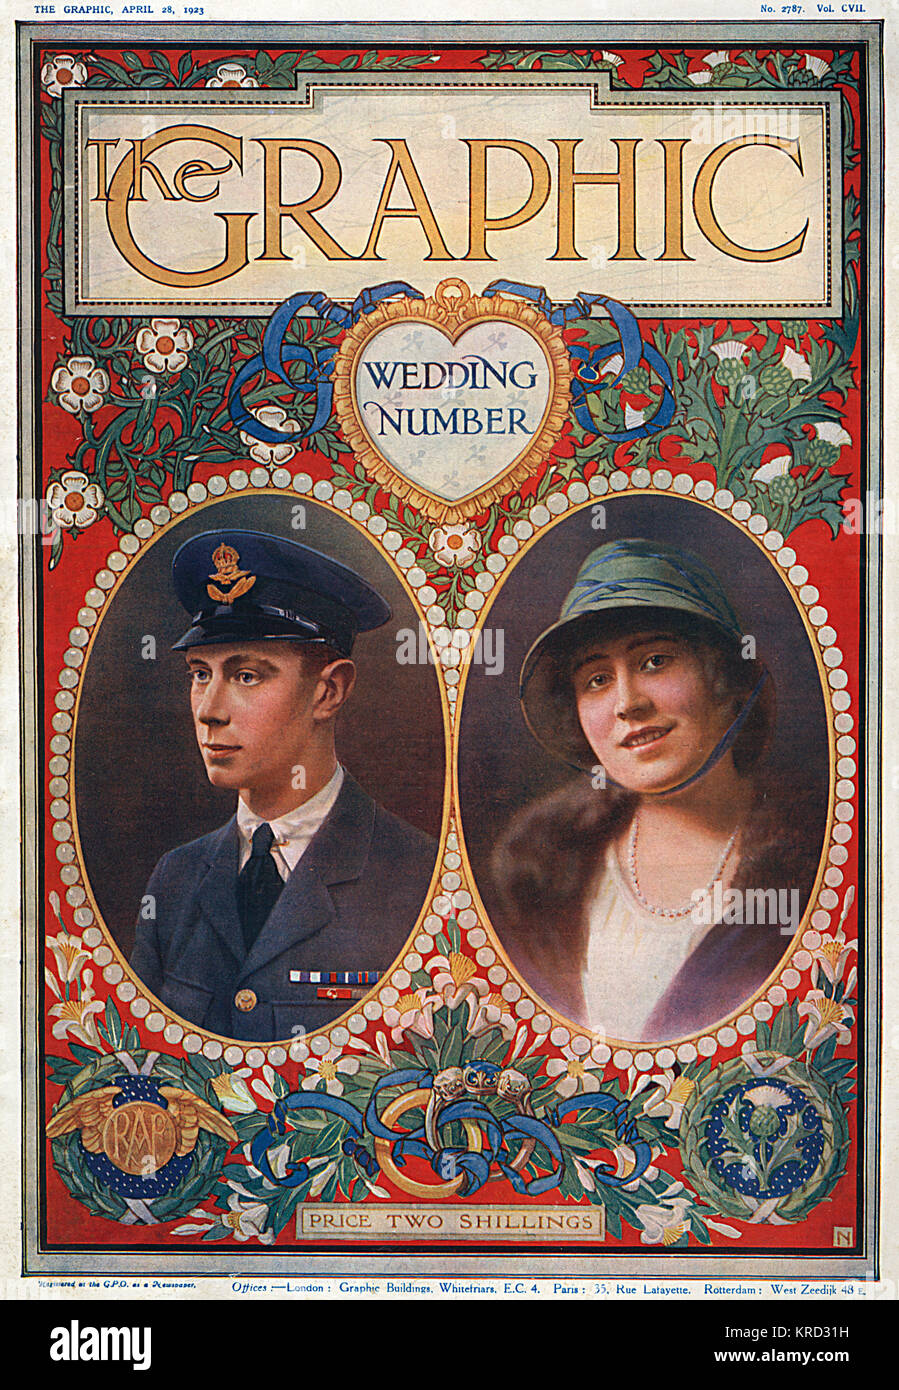 Front cover of The Graphic magazine's Royal Wedding Number, celebrating the marriage of Prince Albert, Duke of York to Lady Elizabeth Bowes-Lyon on 26 April 1923.  The cover design features the English rose, Scottish thistle, the emblem of the RAF (with the Duke in uniform) and an engagement ring.     Date: 1923 Stock Photo